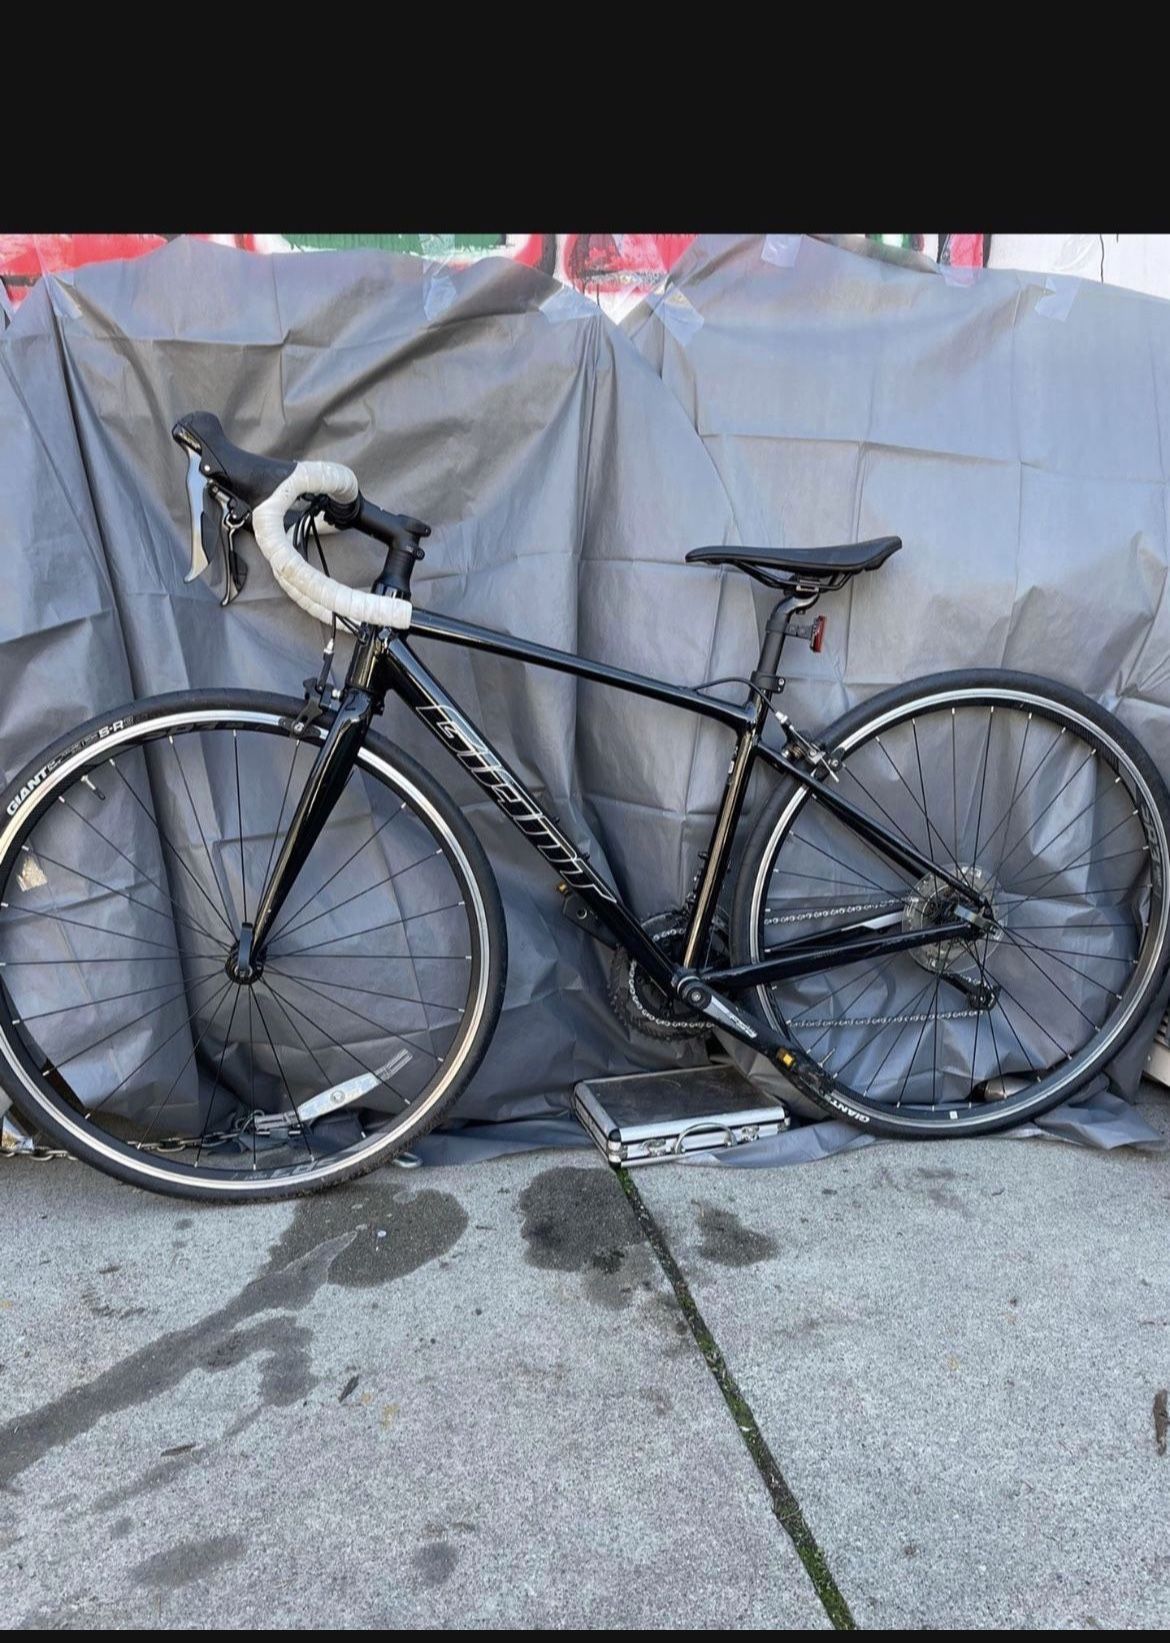 On Sale Giant Contend bike,8 speeds,Frame M,S claris gears,Rims 27,$$$420 dollars in San Leandro